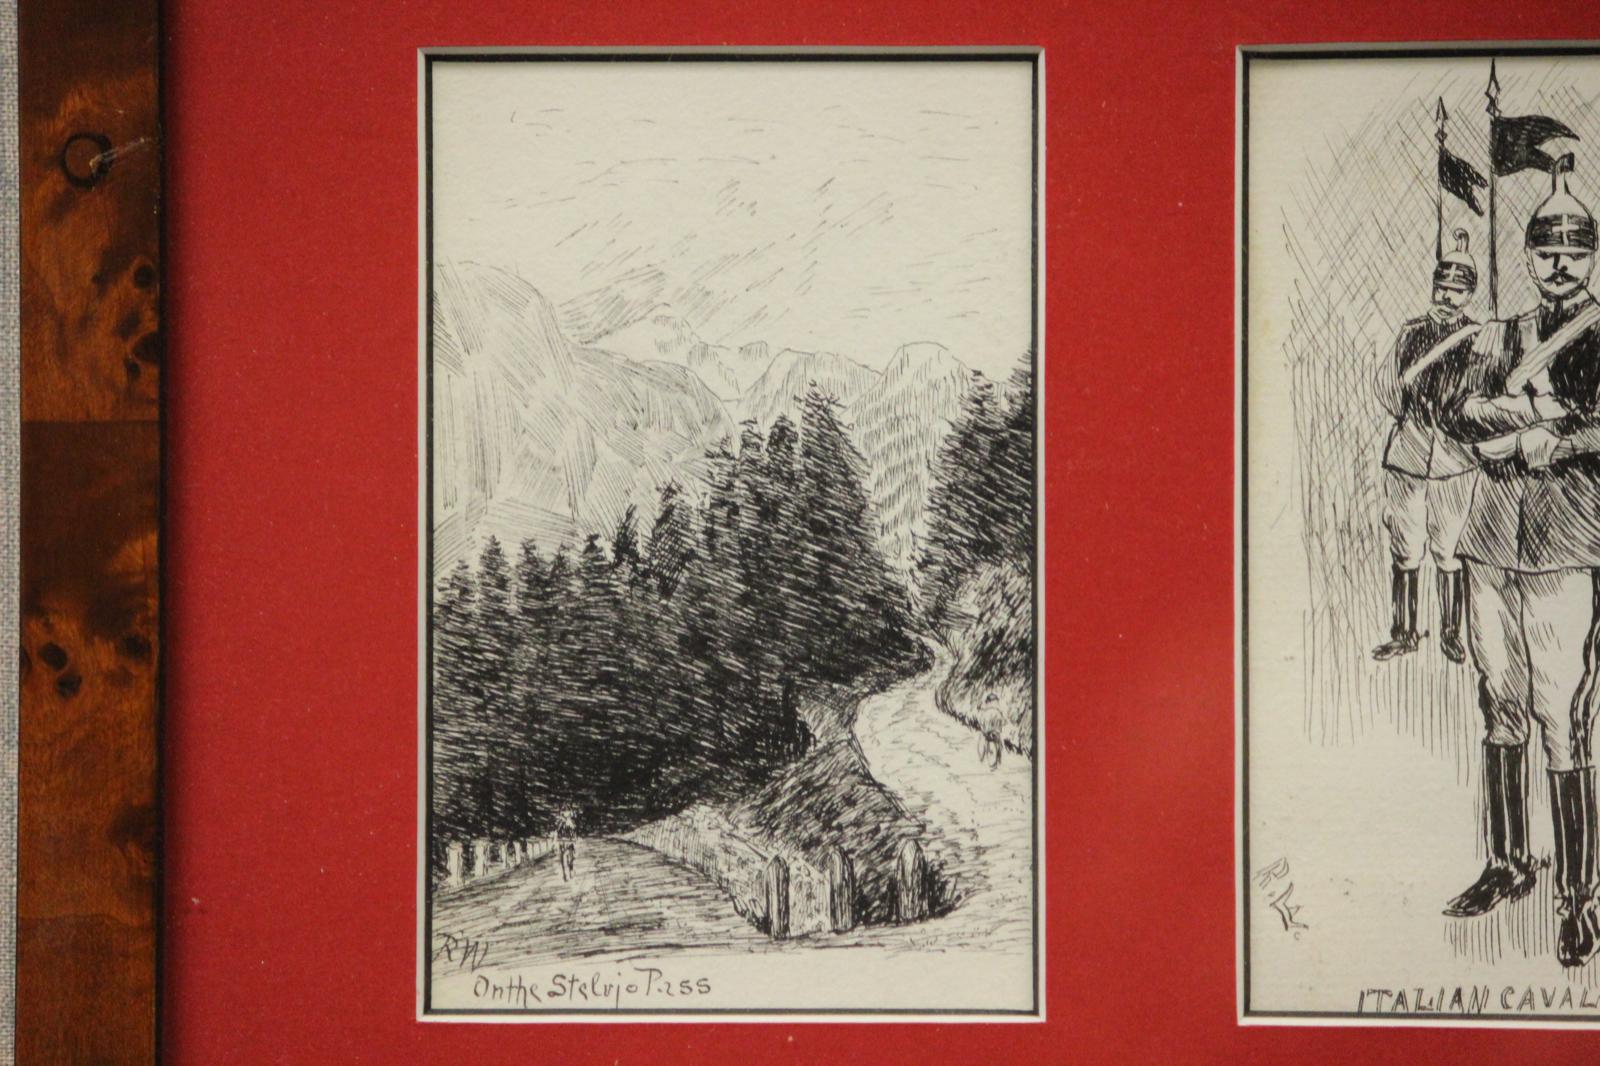 Charming original hand-drawn pen & ink sketches of scenes in Italy & Switzerland by R W(eniger) on (4) postcards c1910s addressed to (the philanthropist) Seymour H Knox of Buffalo, NY

Image Sz: 11 3/4